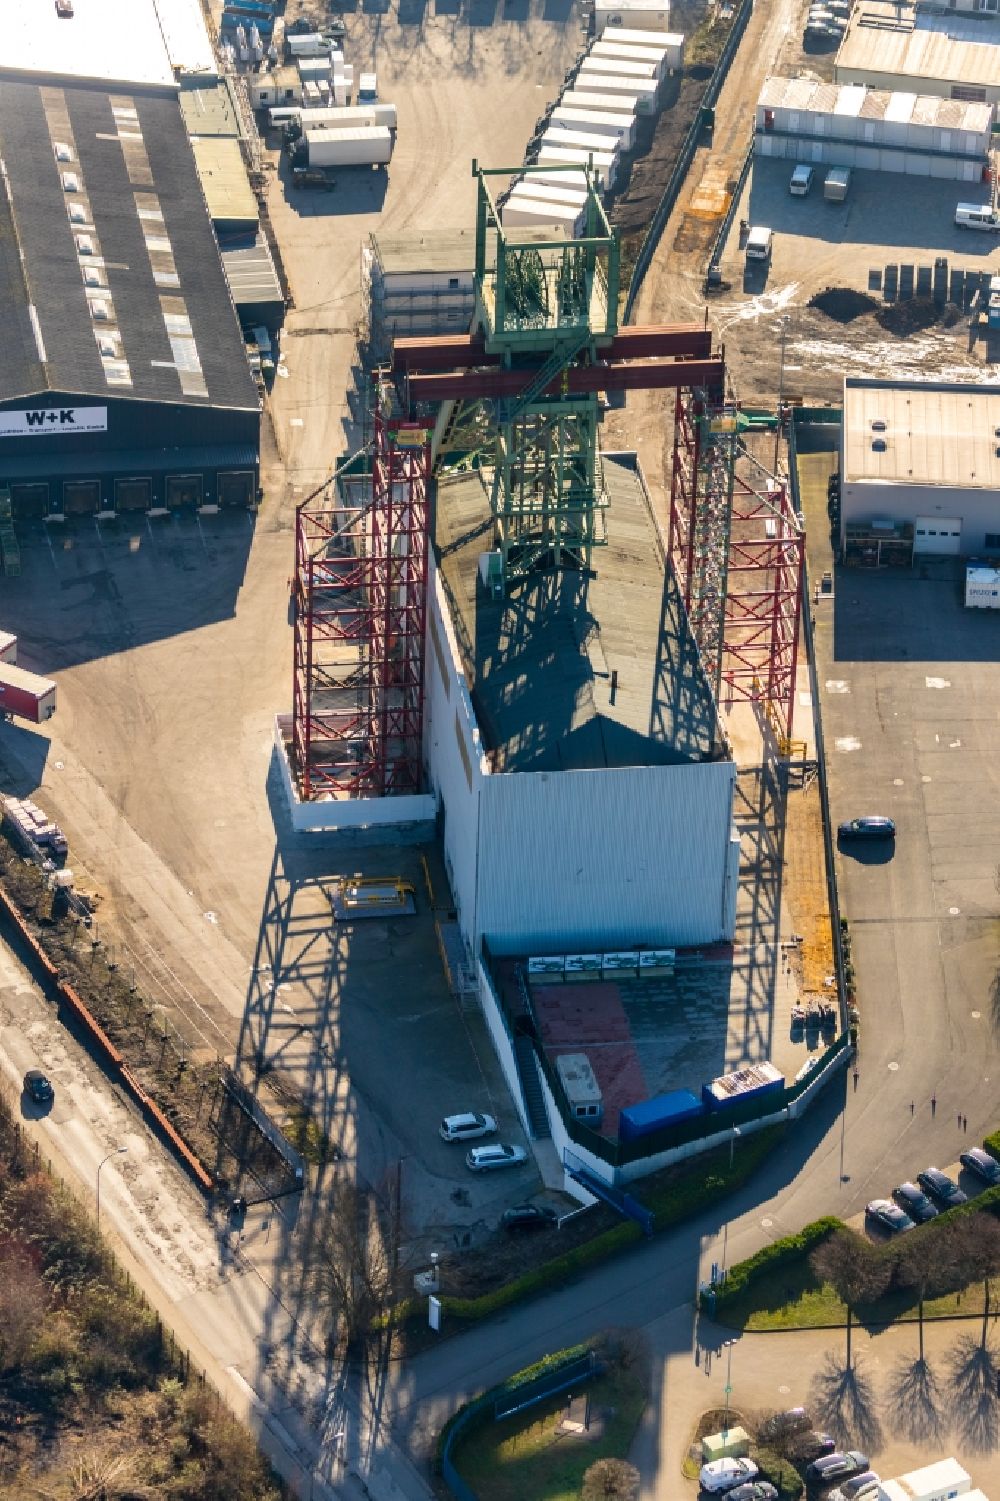 Aerial image Bochum - Conveyors and mining pits at the headframe formerly Zeche Robert Mueser on Von-Waldthausen-Strasse in the district Werne in Bochum in the state North Rhine-Westphalia, Germany